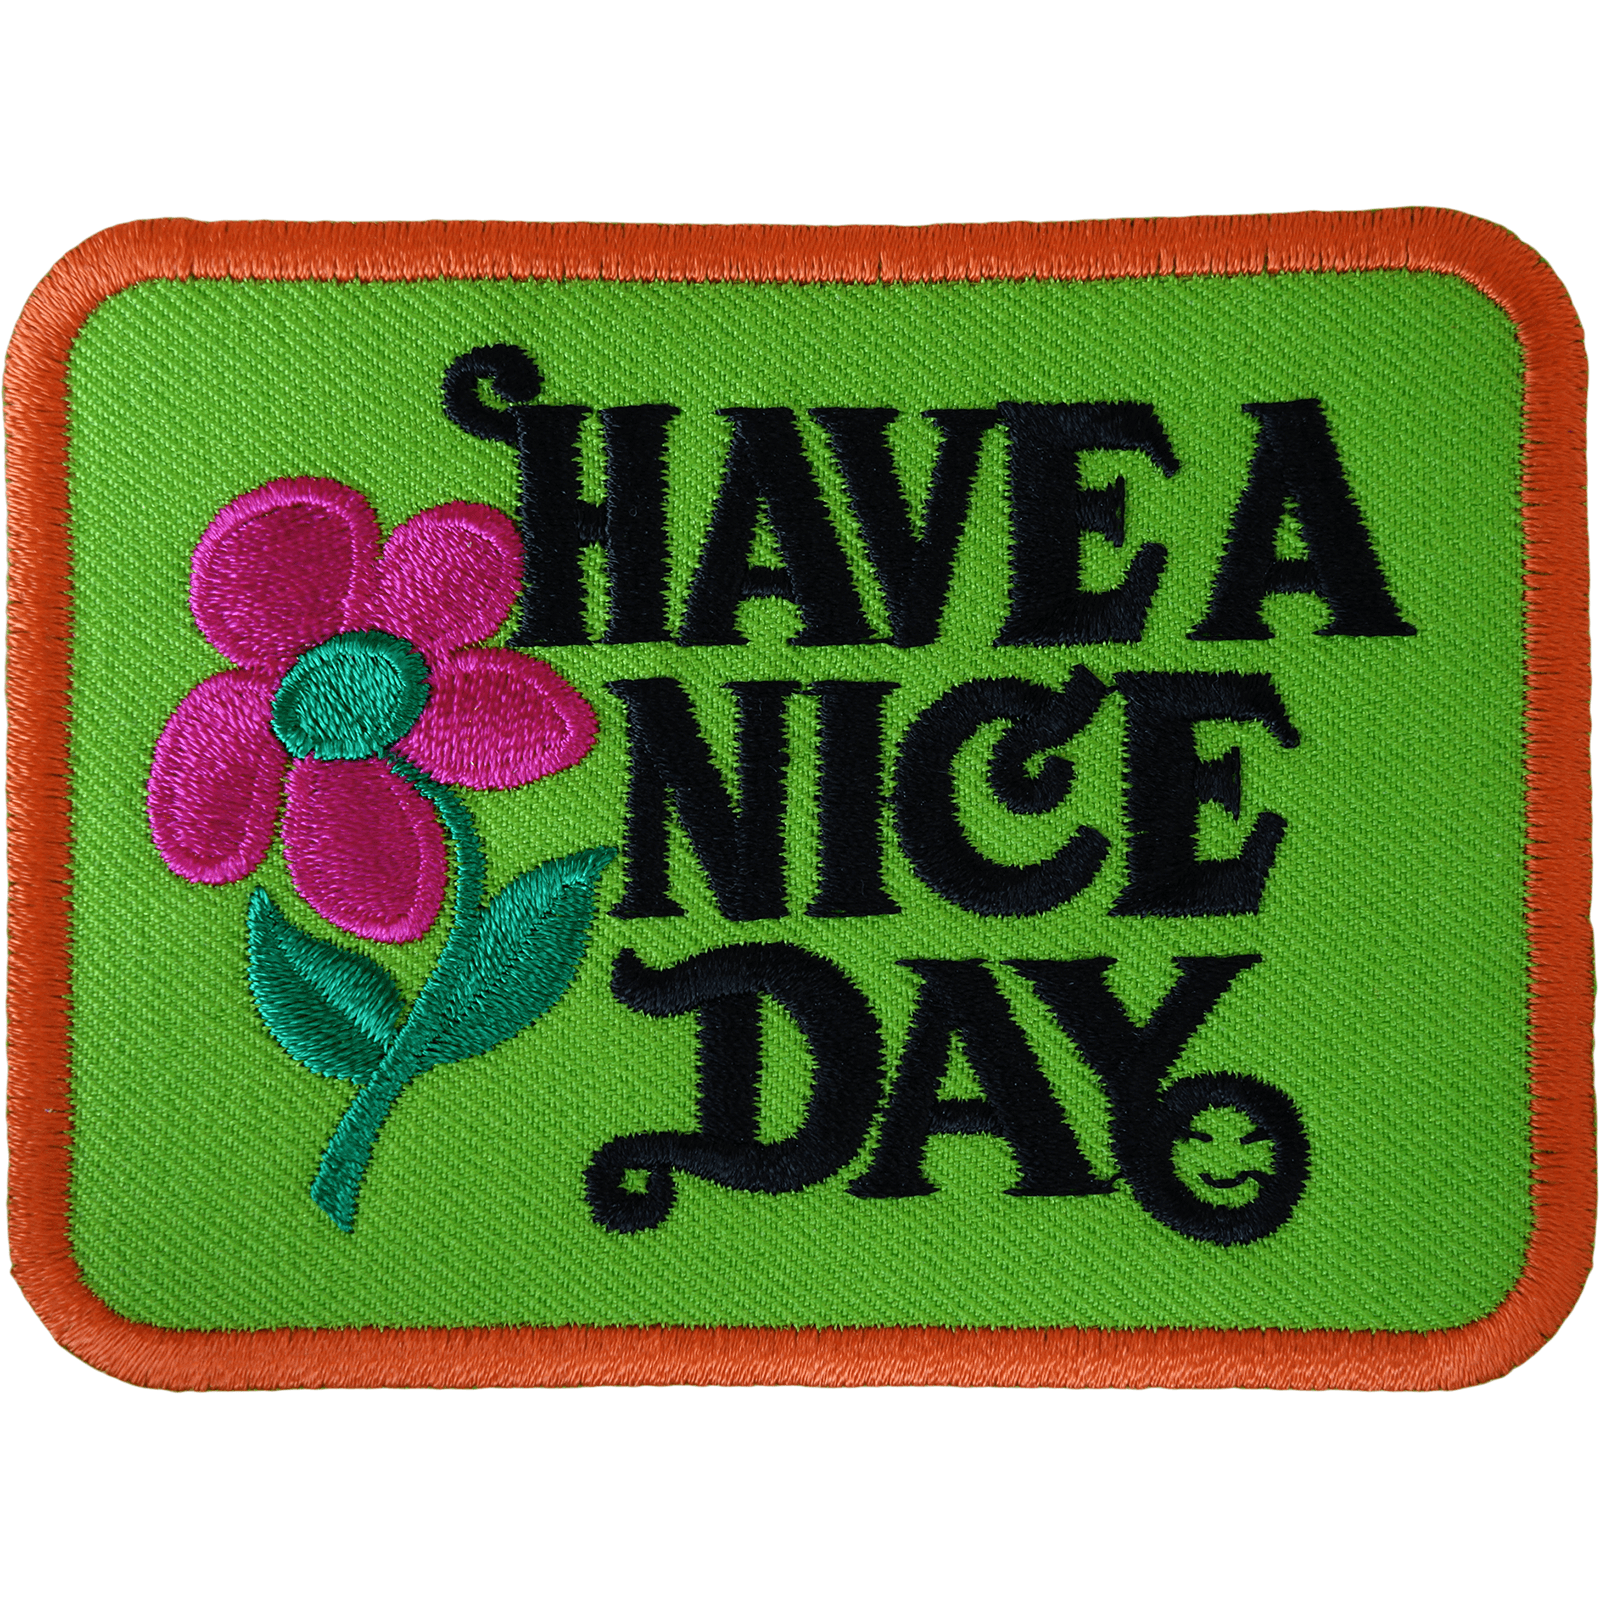 HAVE A NICE DAY Patch Iron Sew On 60s Hippie Flower Embroidered Badge Embroidery